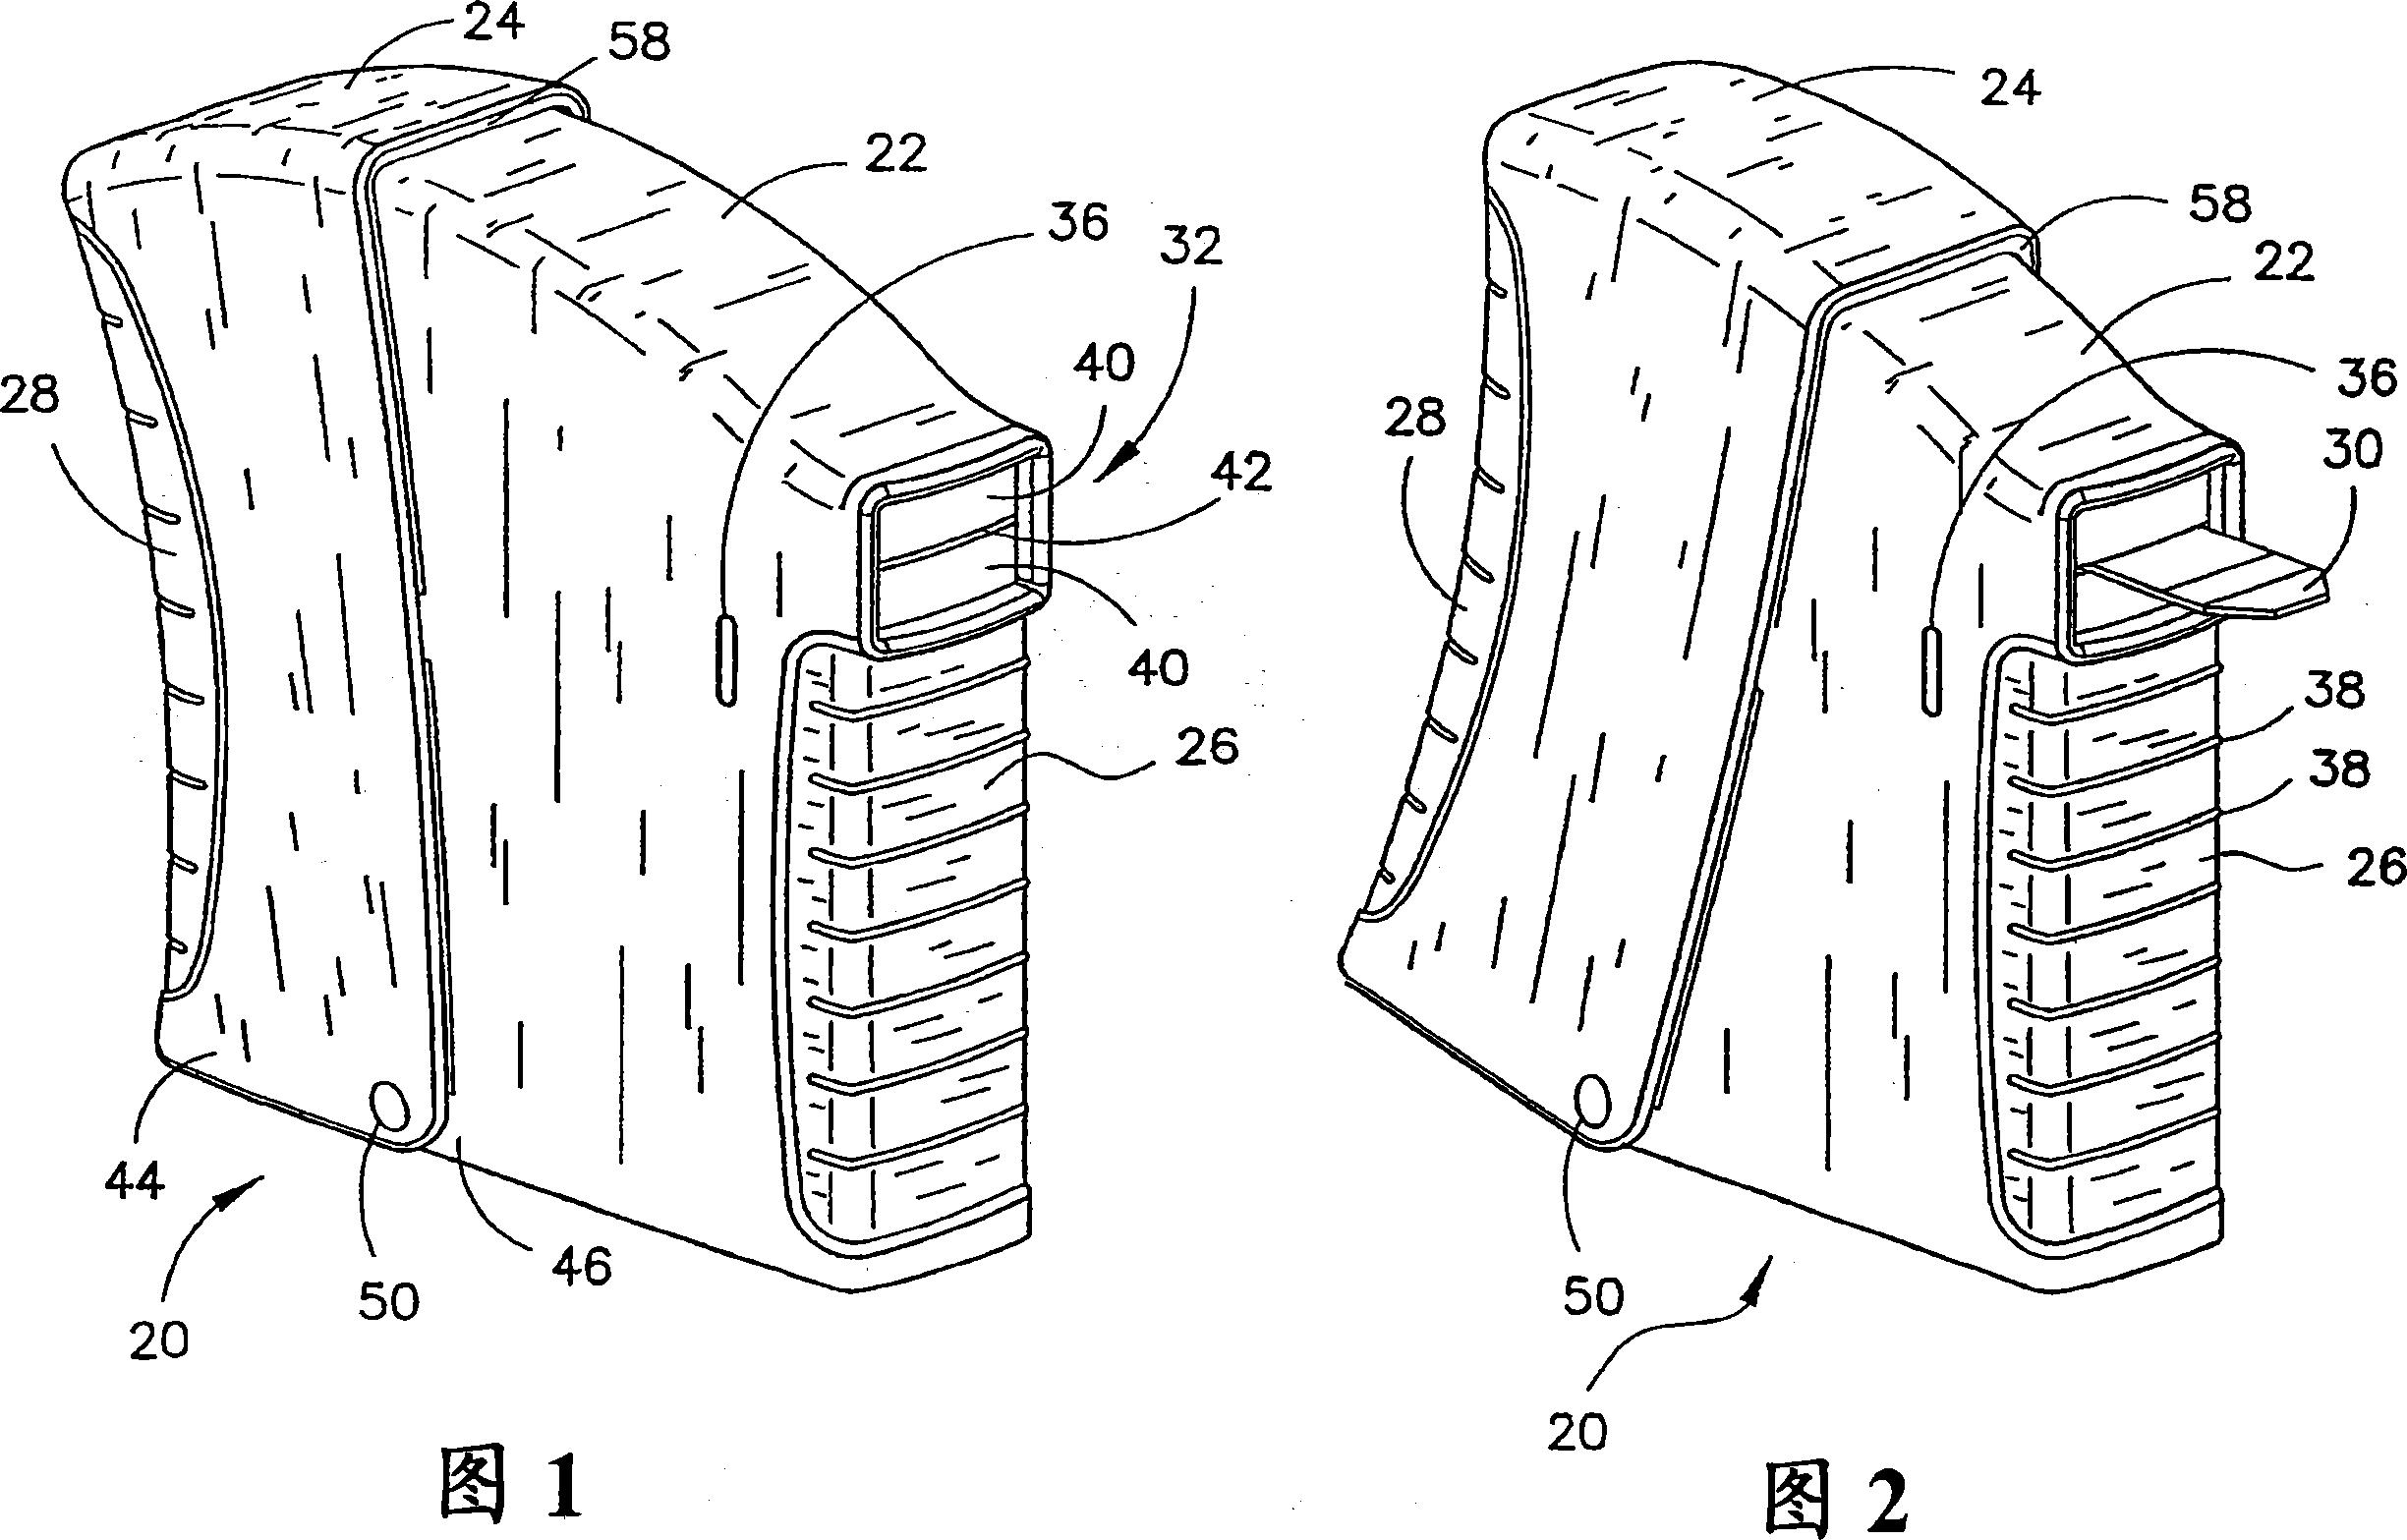 Dispenser for flattened articles such as diagnostic test strips